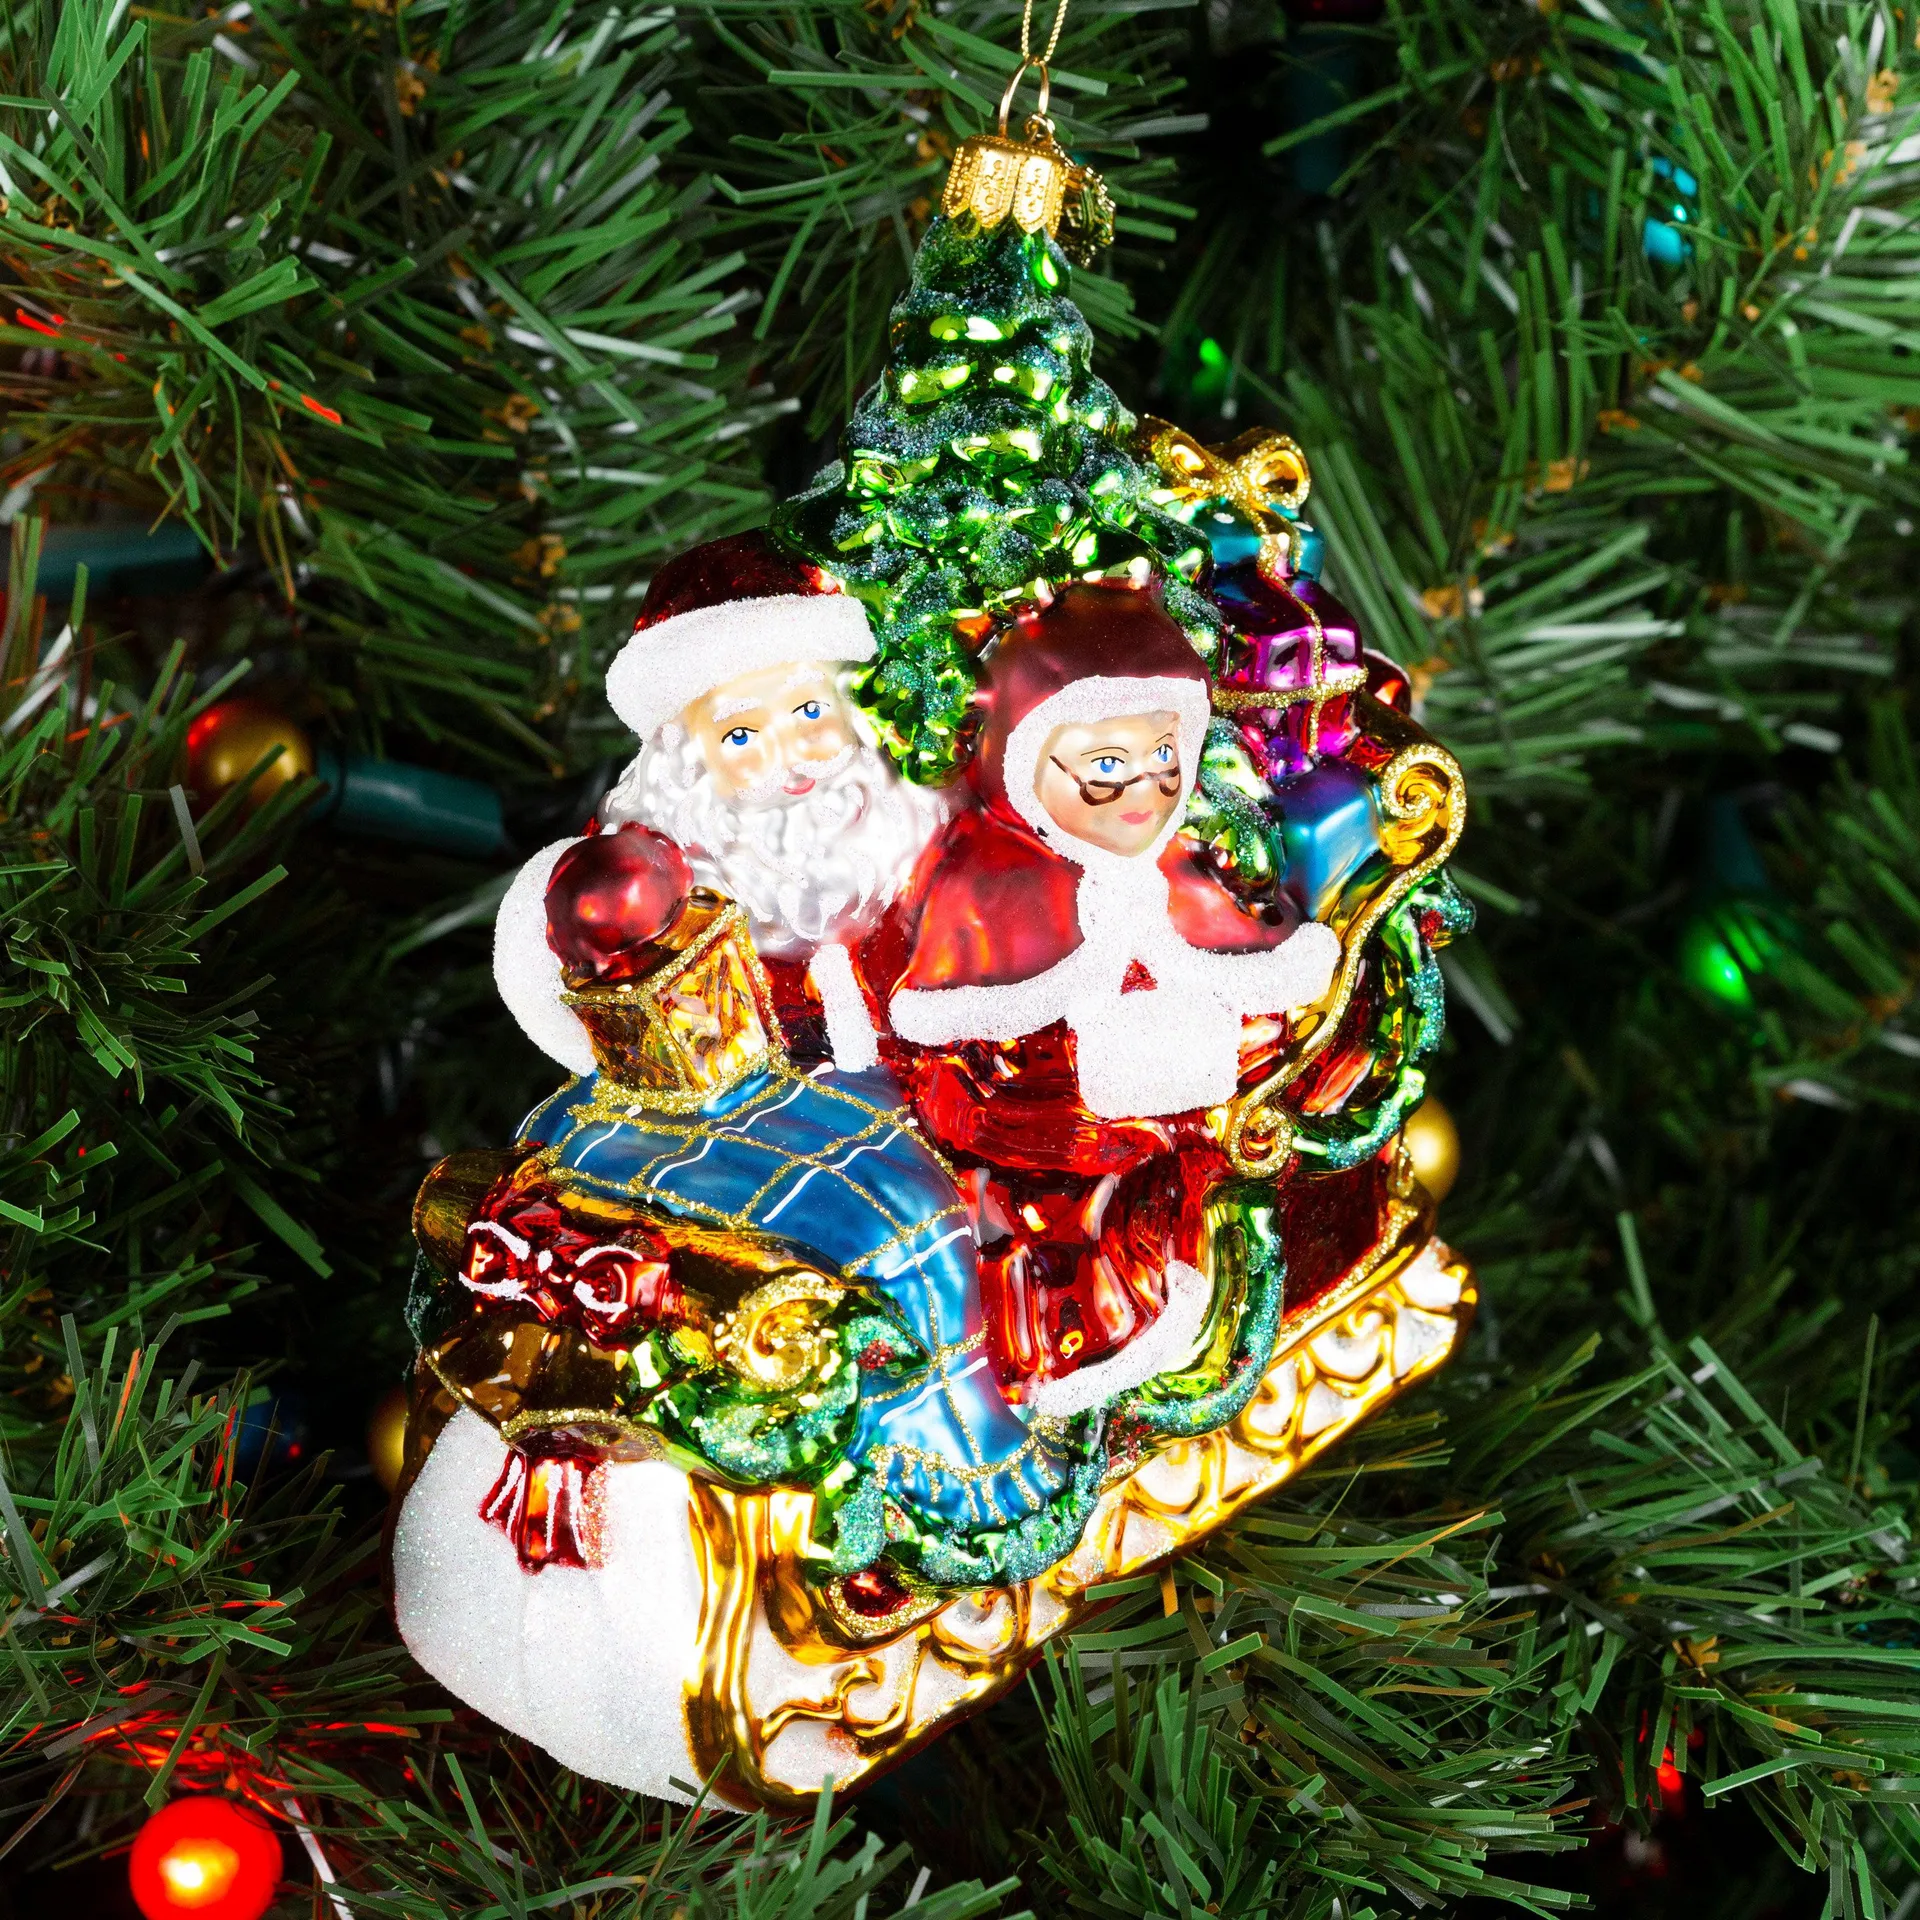 Pier 1 Santa and Mrs Claus on a Sleigh Ride Glass Christmas Ornament